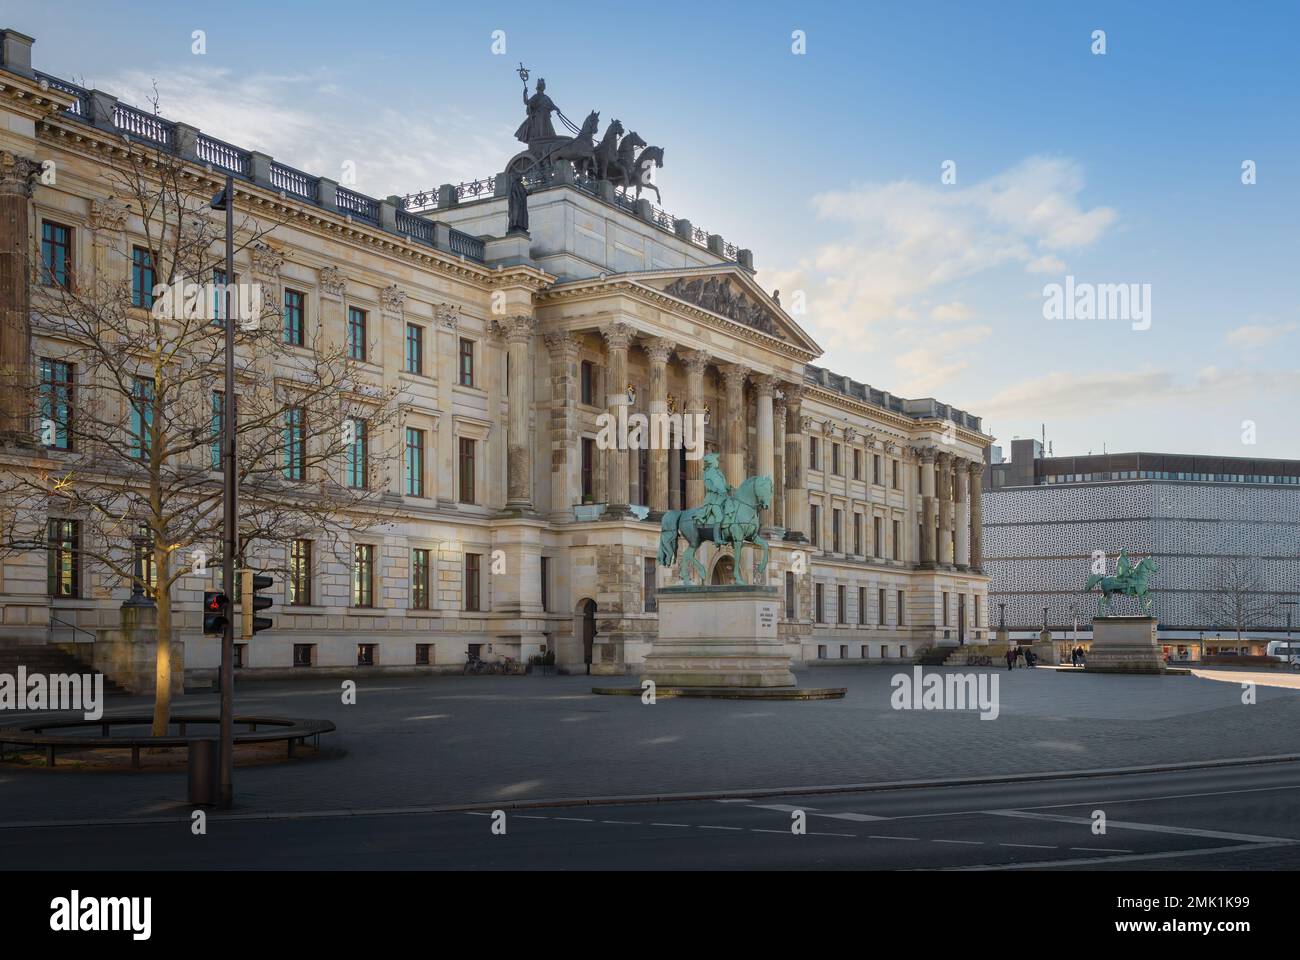 Brunswick Residence Palace with Quadriga and Equestrian Statues at Schlossplatz (Palace Square) - Braunschweig, Lower Saxony, Germany Stock Photo